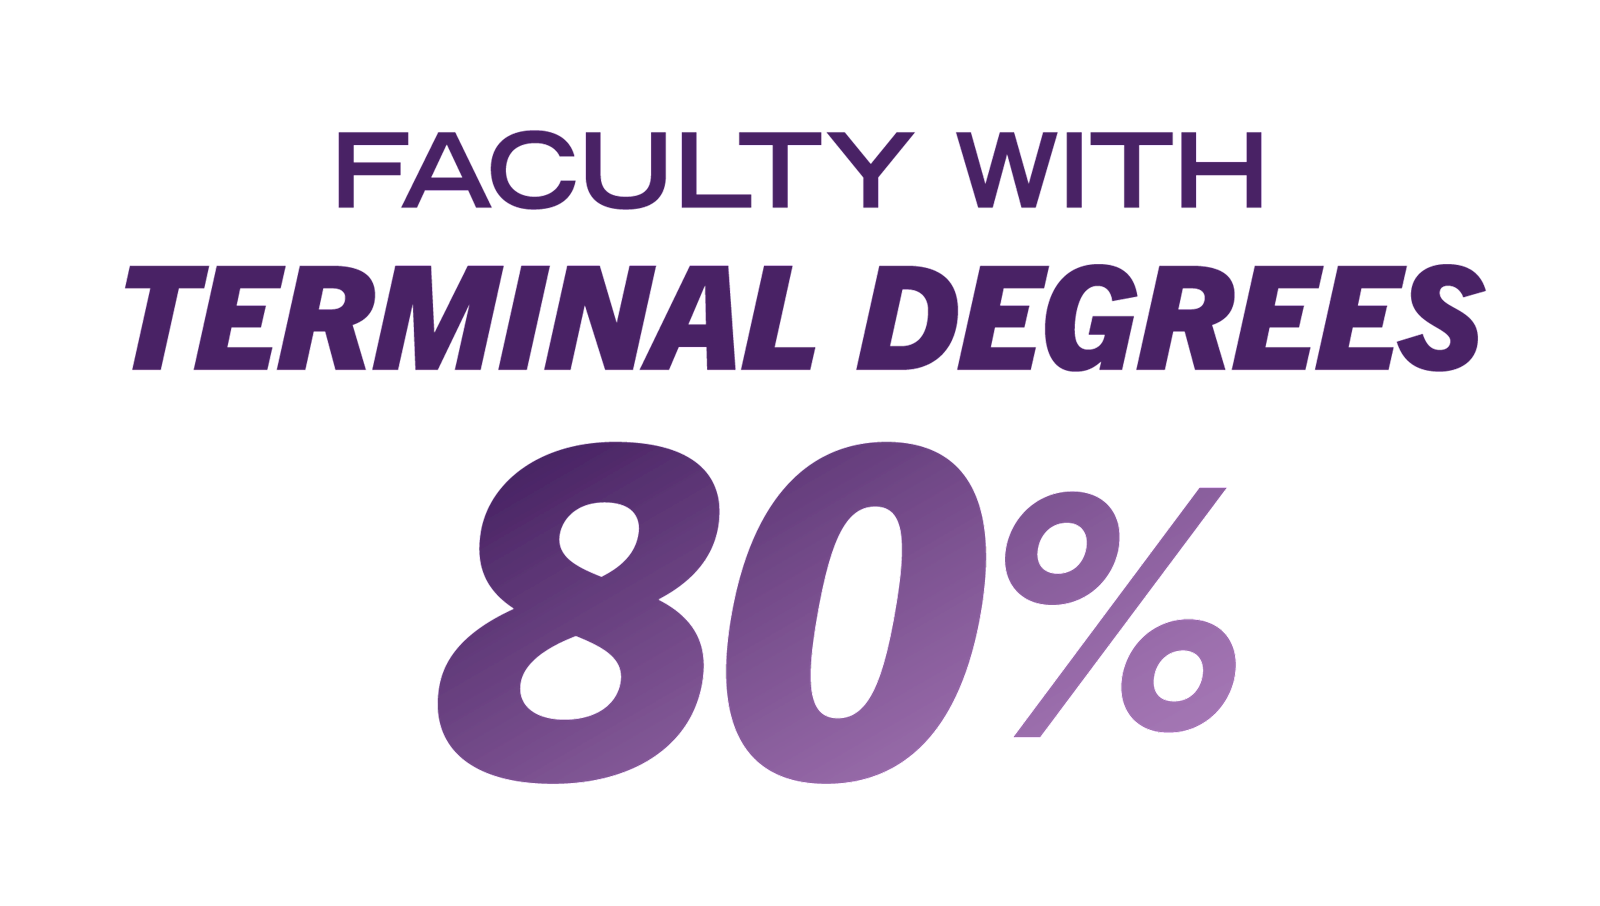 80% of faculty have terminal degrees.